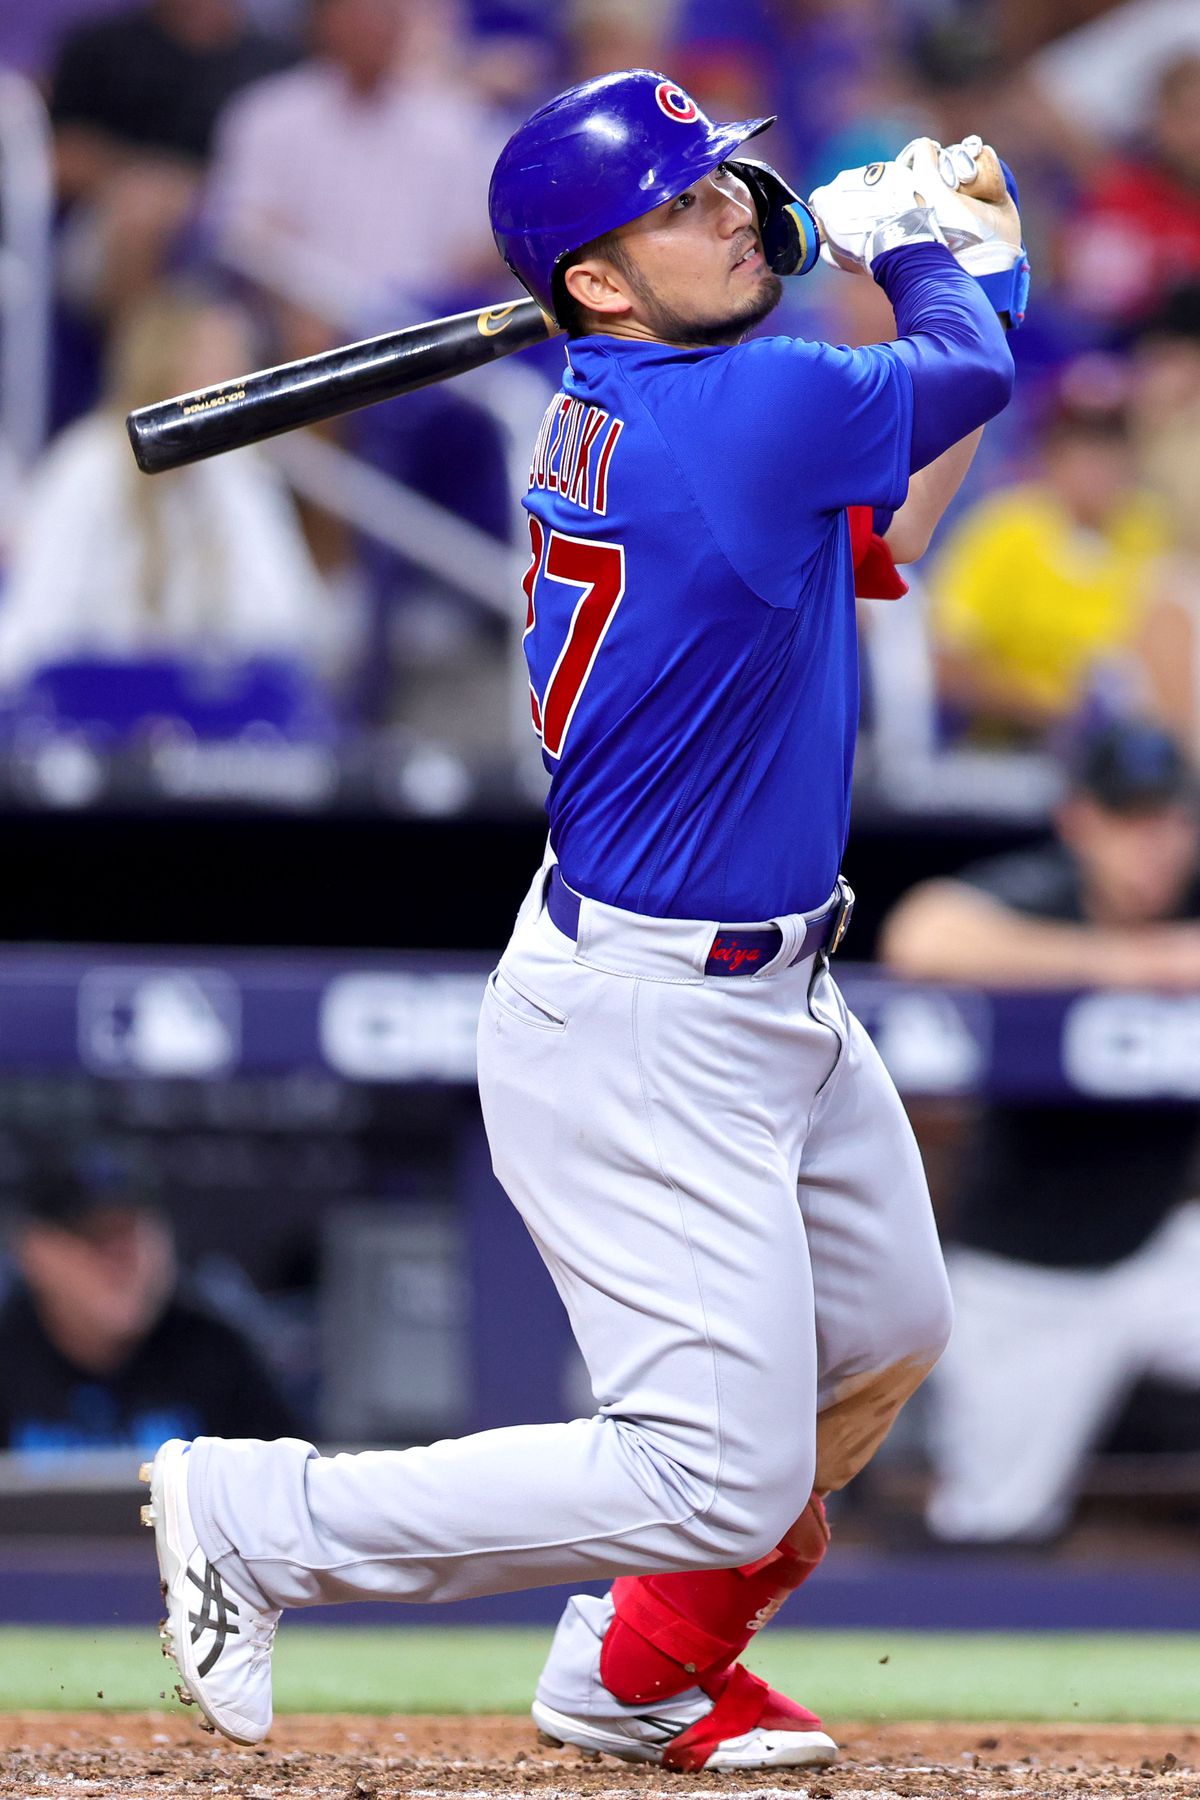 Seiya Suzuki #27 of the Chicago Cubs at bat against the Miami Marlins during the seventh inning at loanDepot park on April 30, 2023 in Miami, Florida.